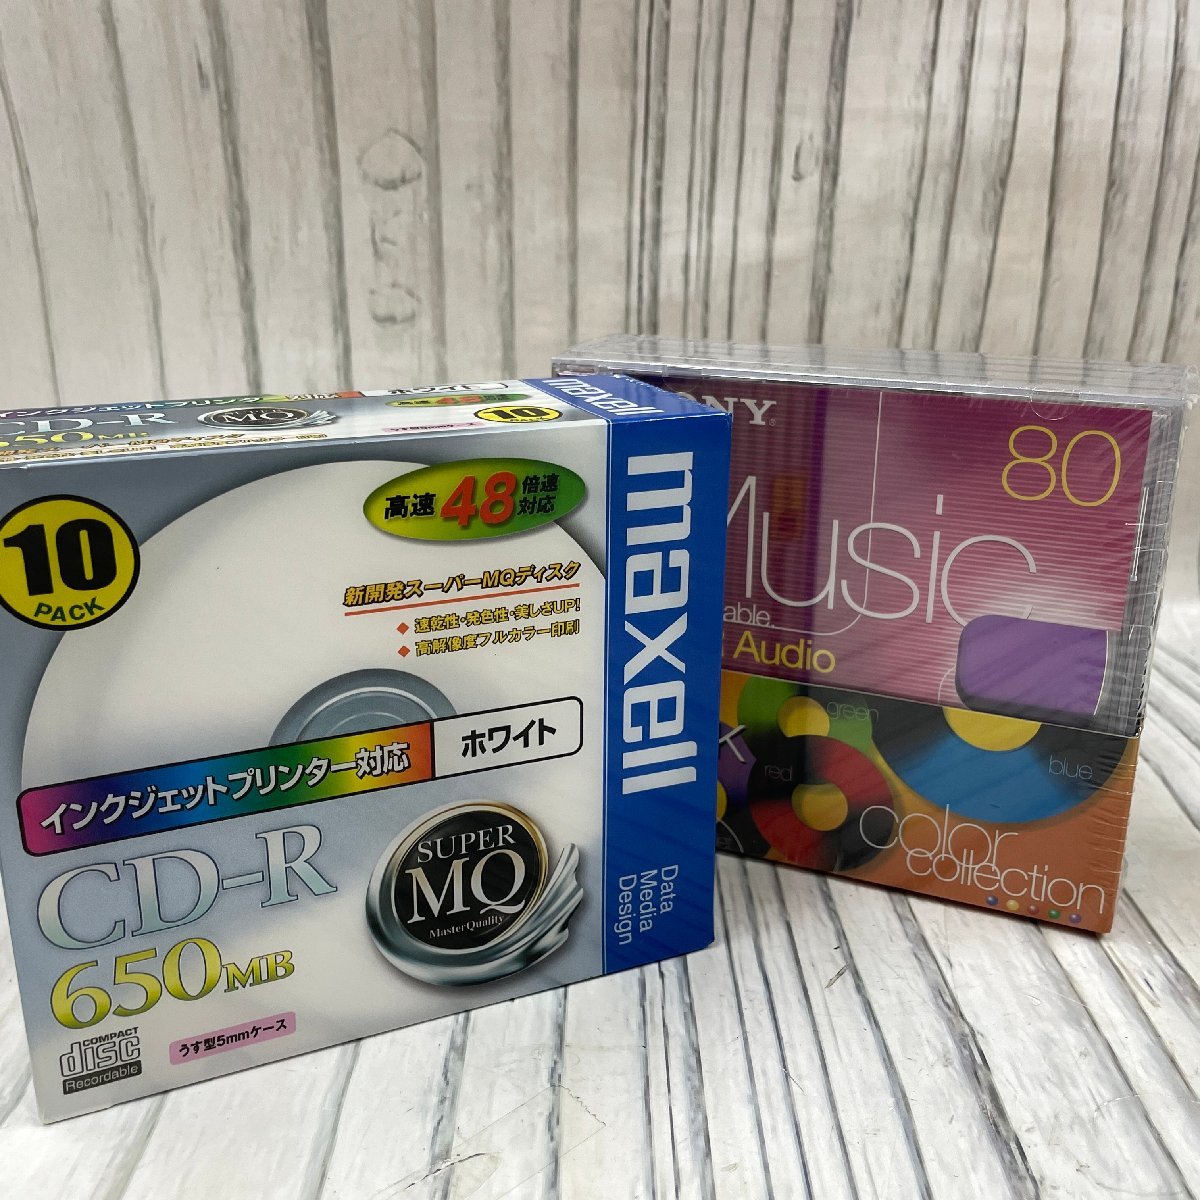 m002 E2(60) 1 未開封 CD-R maxell マクセル 650MB CDR650S.PW1P10S 10PACK 薄型 スリム ＋ SONY ソニー Audio 5PACK_画像1